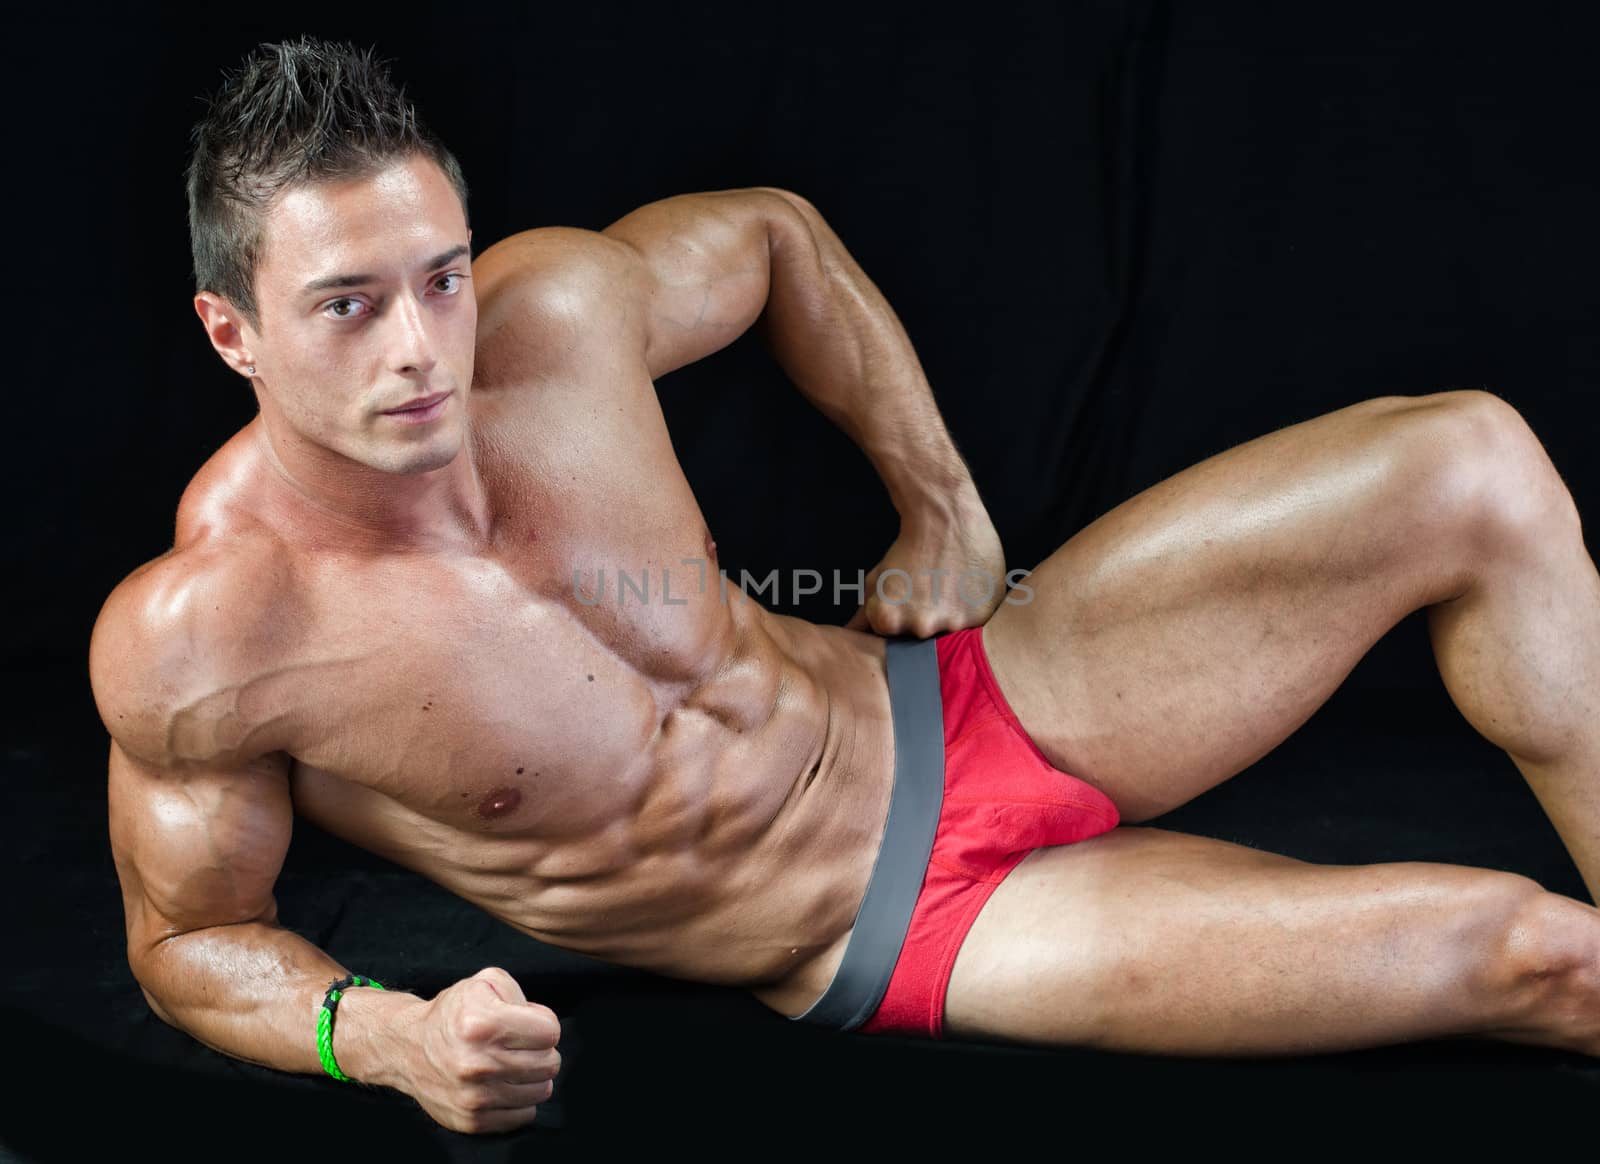 Handsome young bodybuilder laying down on the floor, showing ripped abs, muscular  pecs, arms and legs